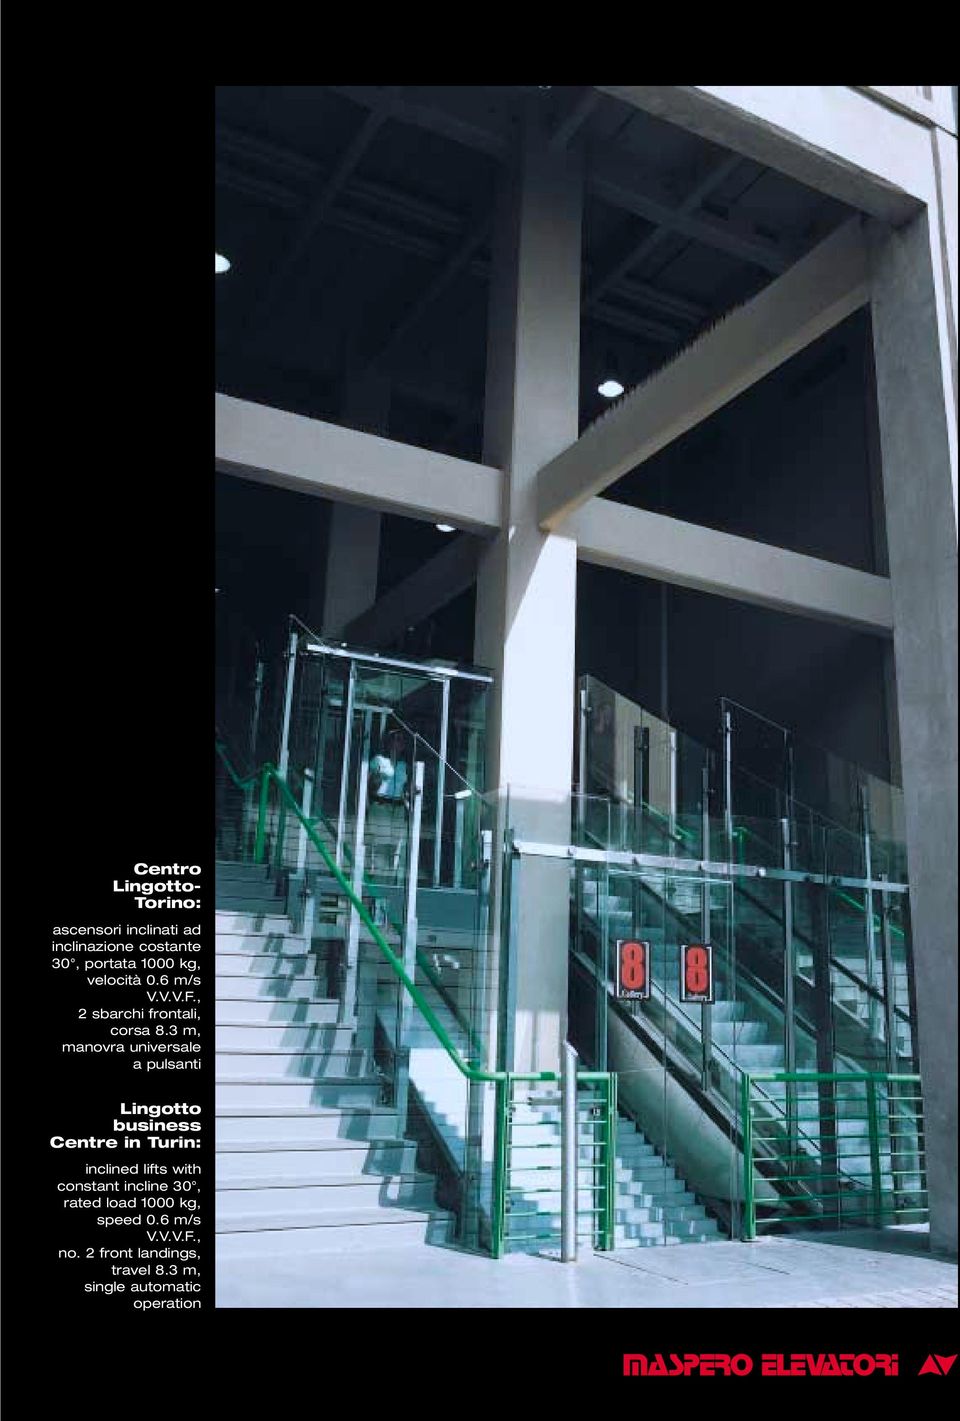 3 m, manovra universale a pulsanti Lingotto business Centre in Turin: inclined lifts with